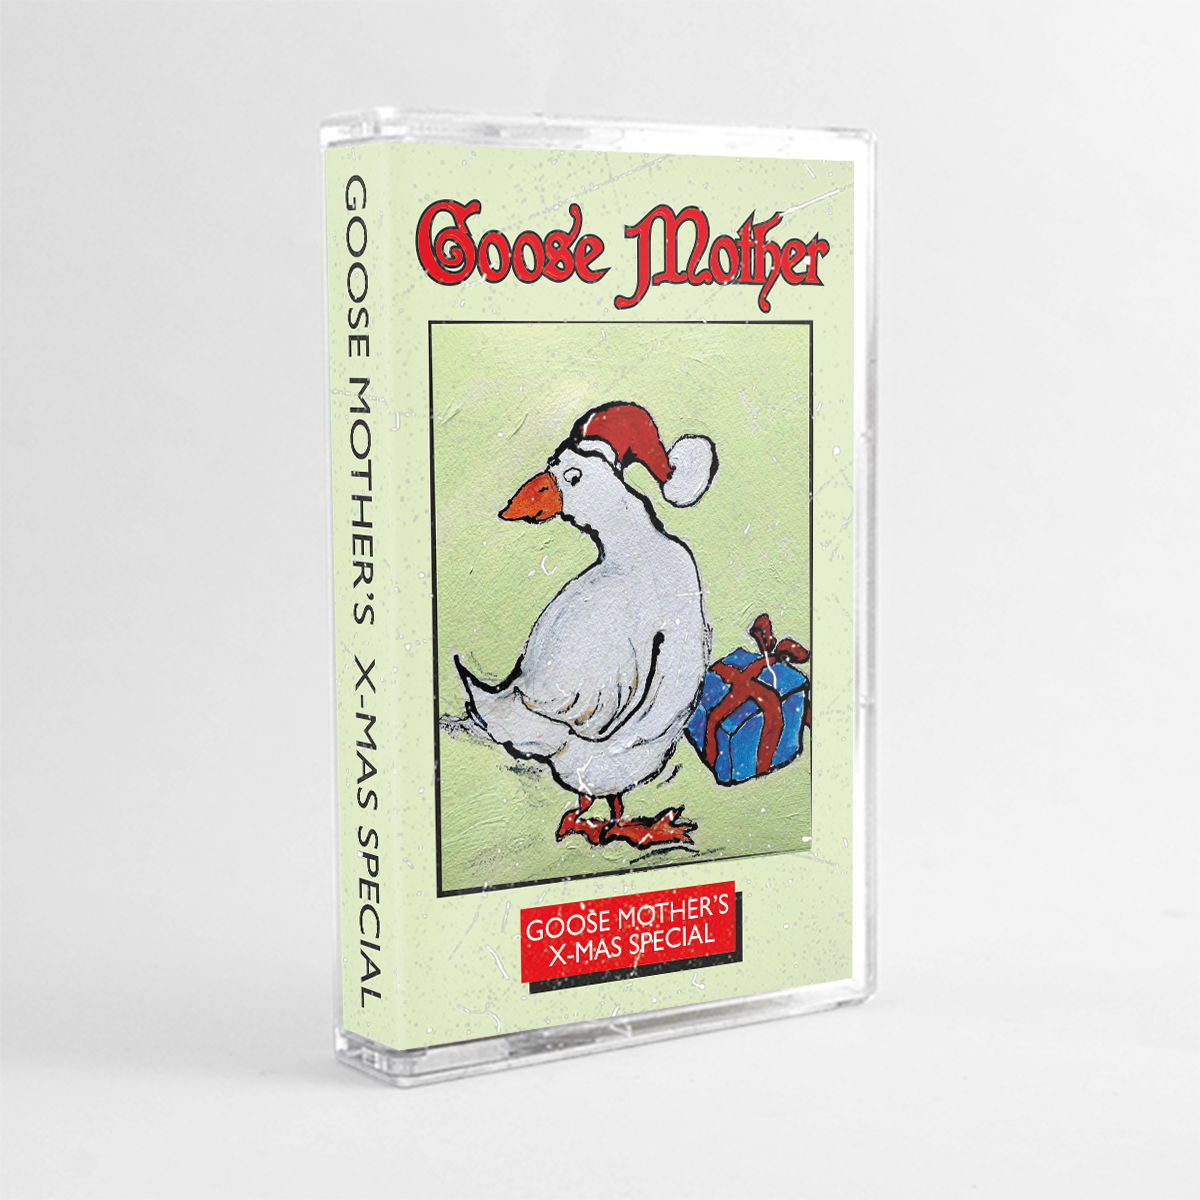 [SOLD OUT] GOOSE MOTHER "X-mas Special" Cassette Tape (lim.50)